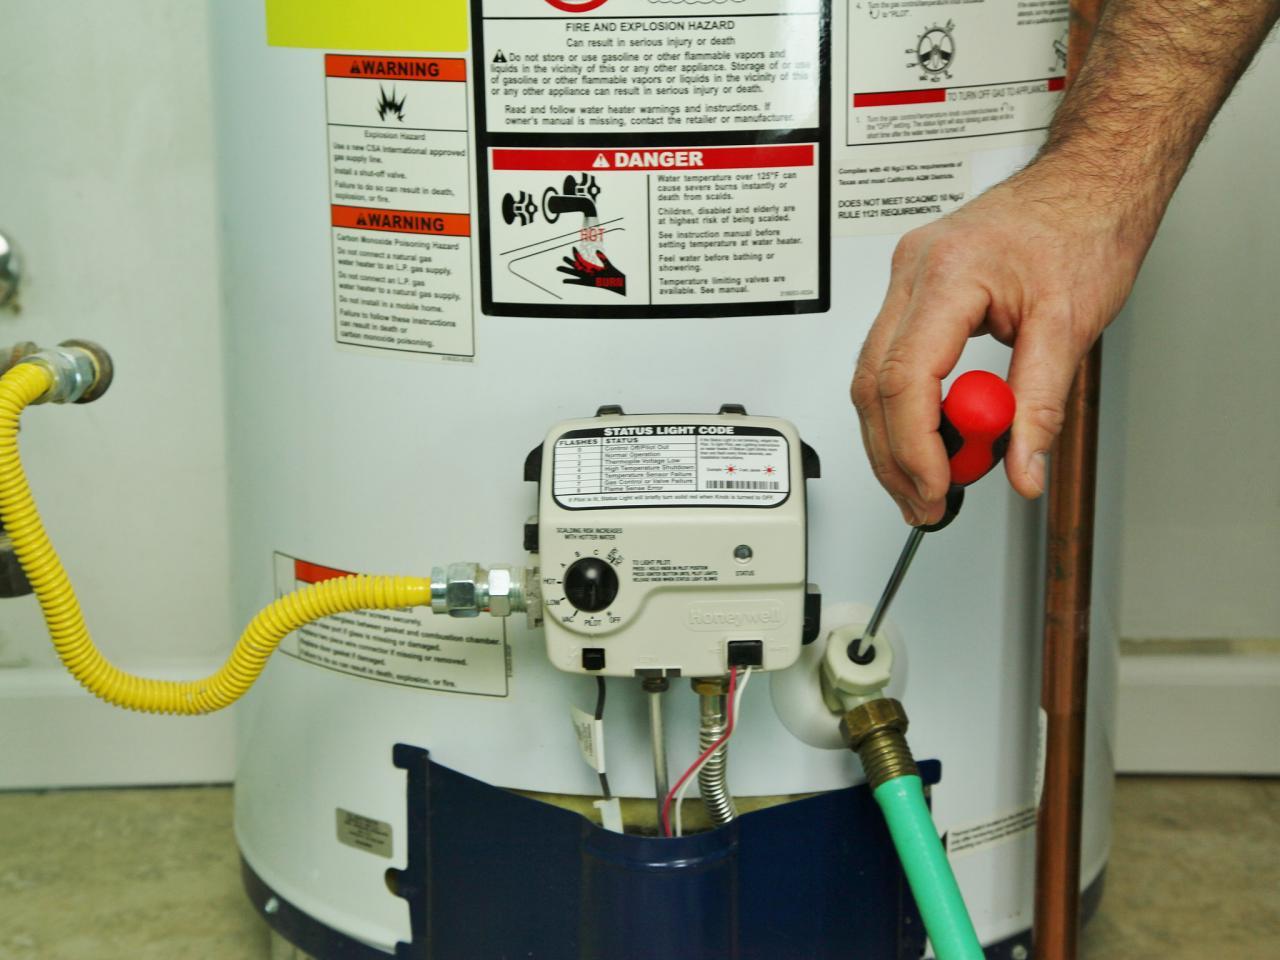 Gas Water Heater pilot goes out if temperature set above warm